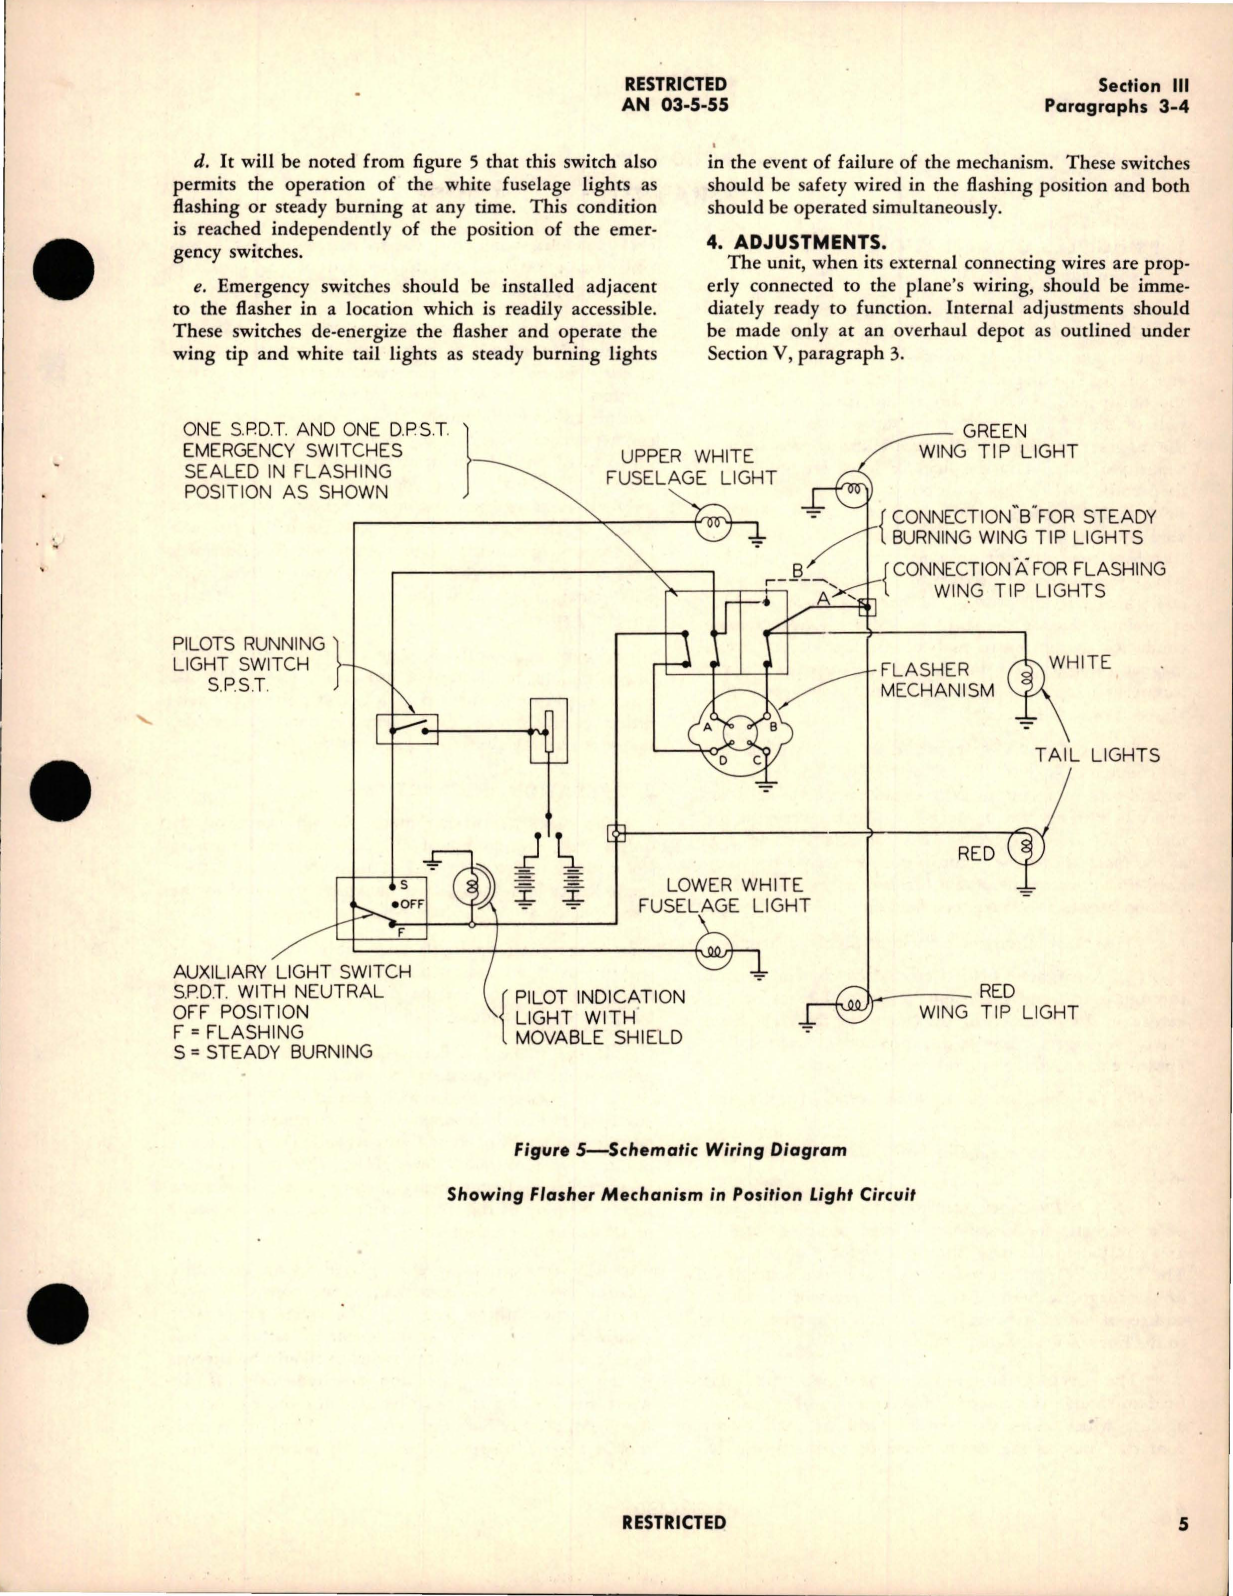 Sample page 9 from AirCorps Library document: Instructions with Parts Catalog for Aircraft Flasher Mechanism - Types FA-121 and FA-122 